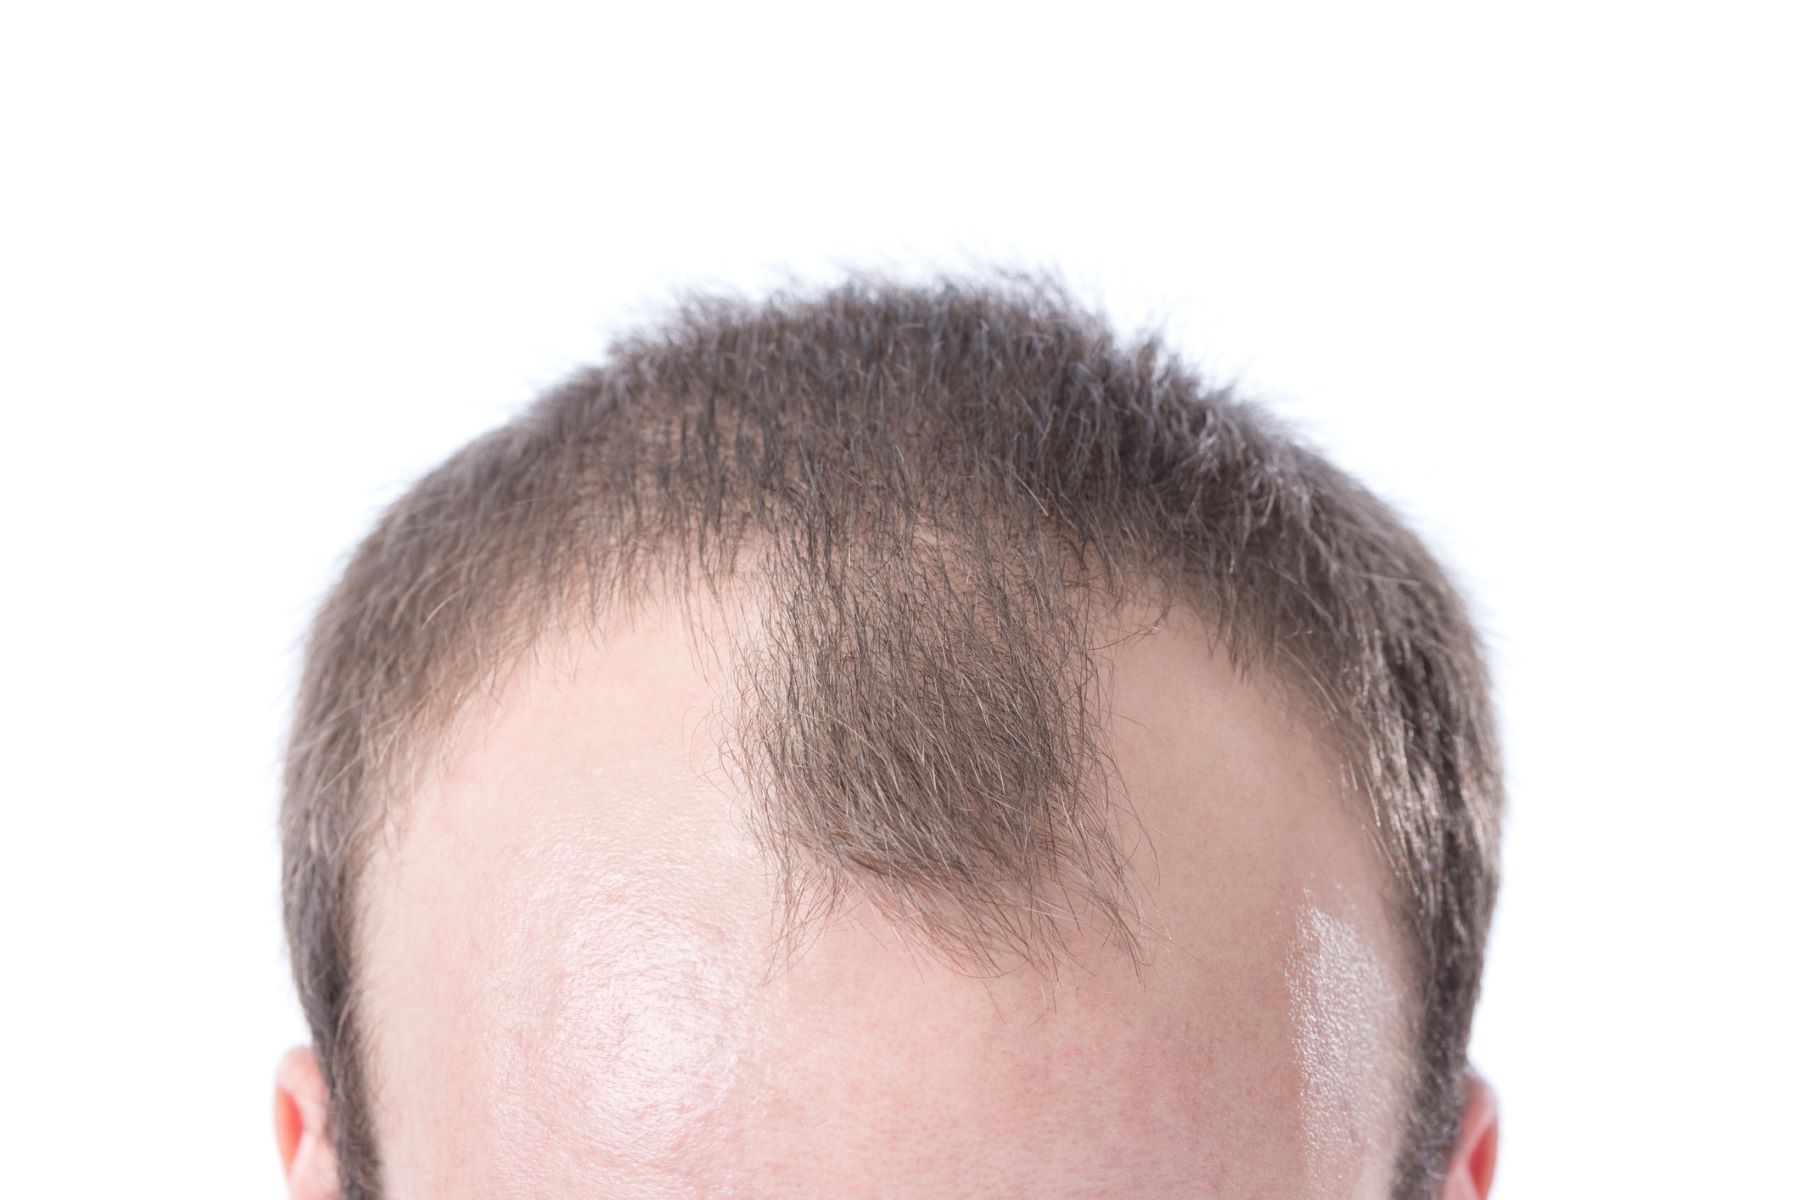 Man with male pattern baldness and receding hairline